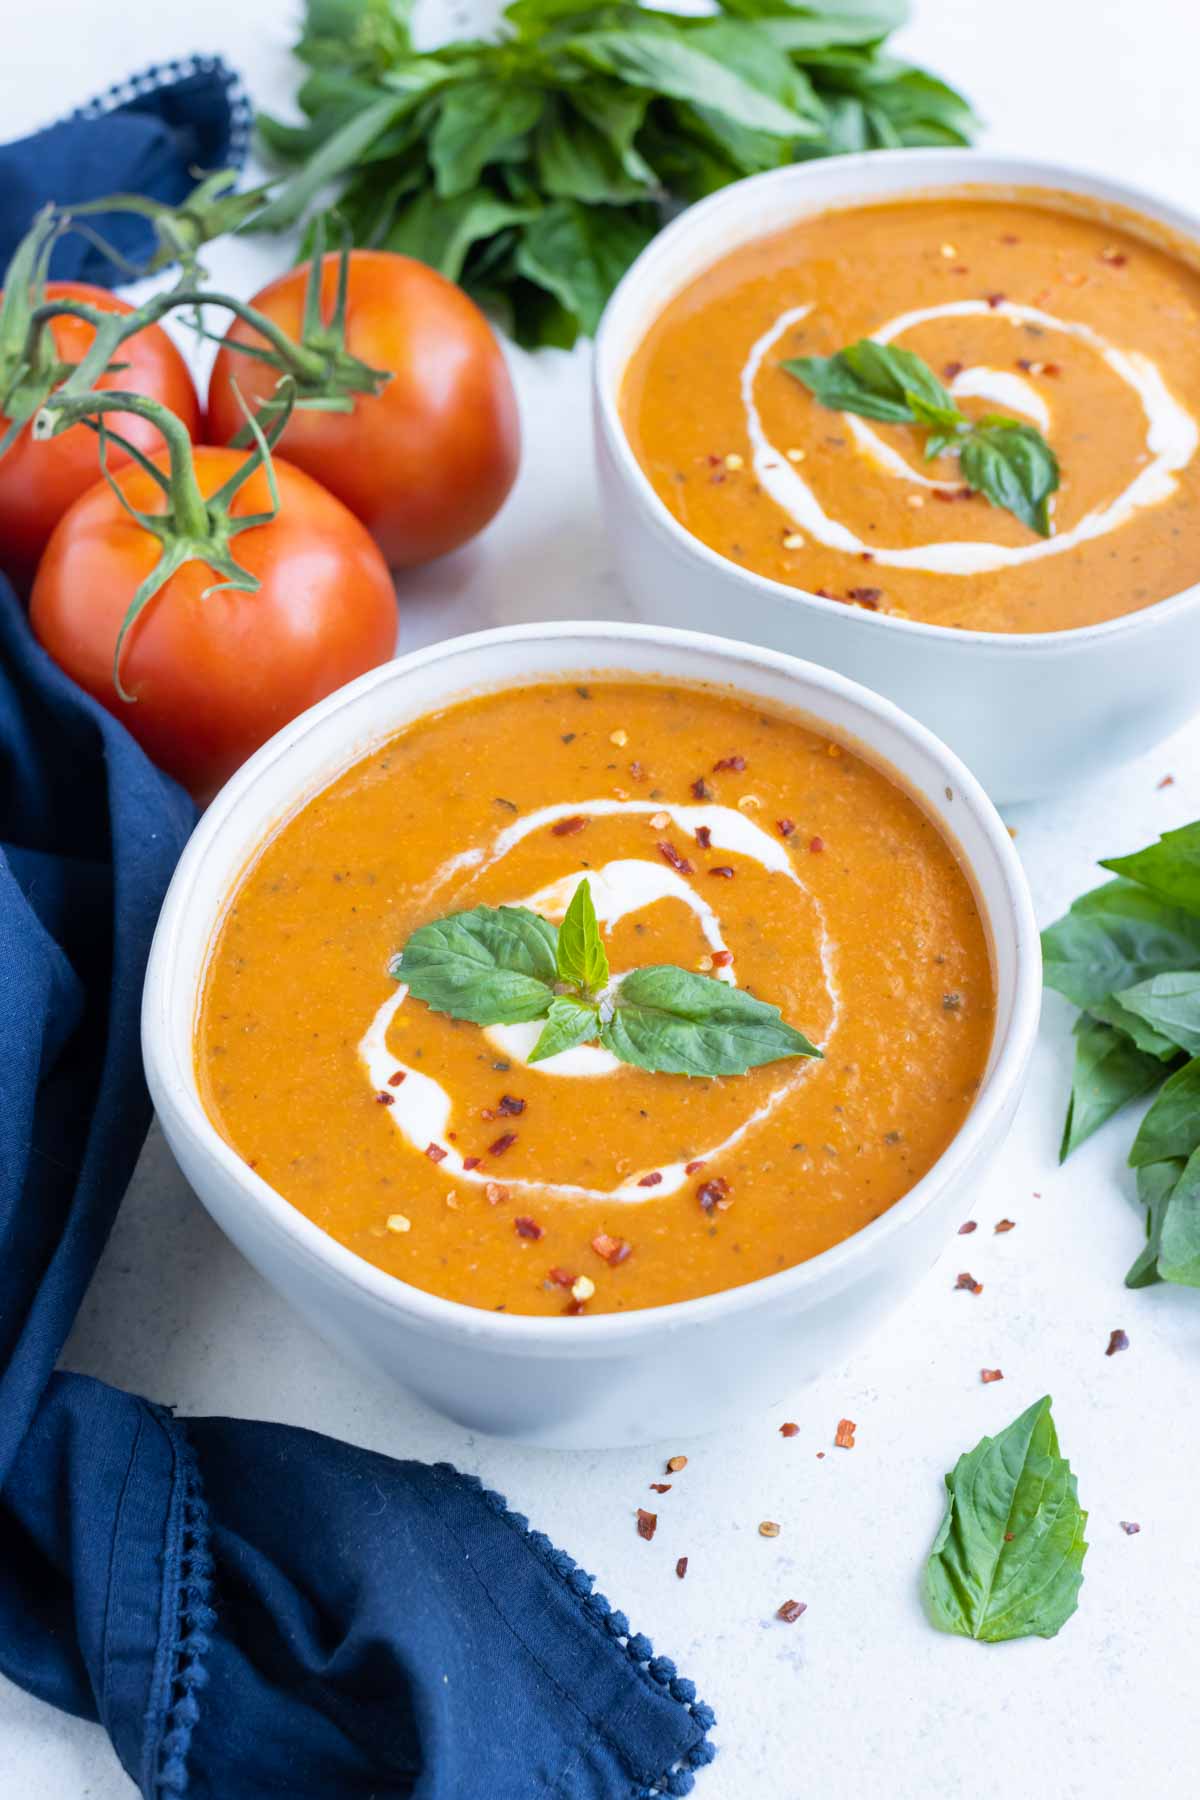 Healthy and savory tomato basil bisque is the perfect fall meal.